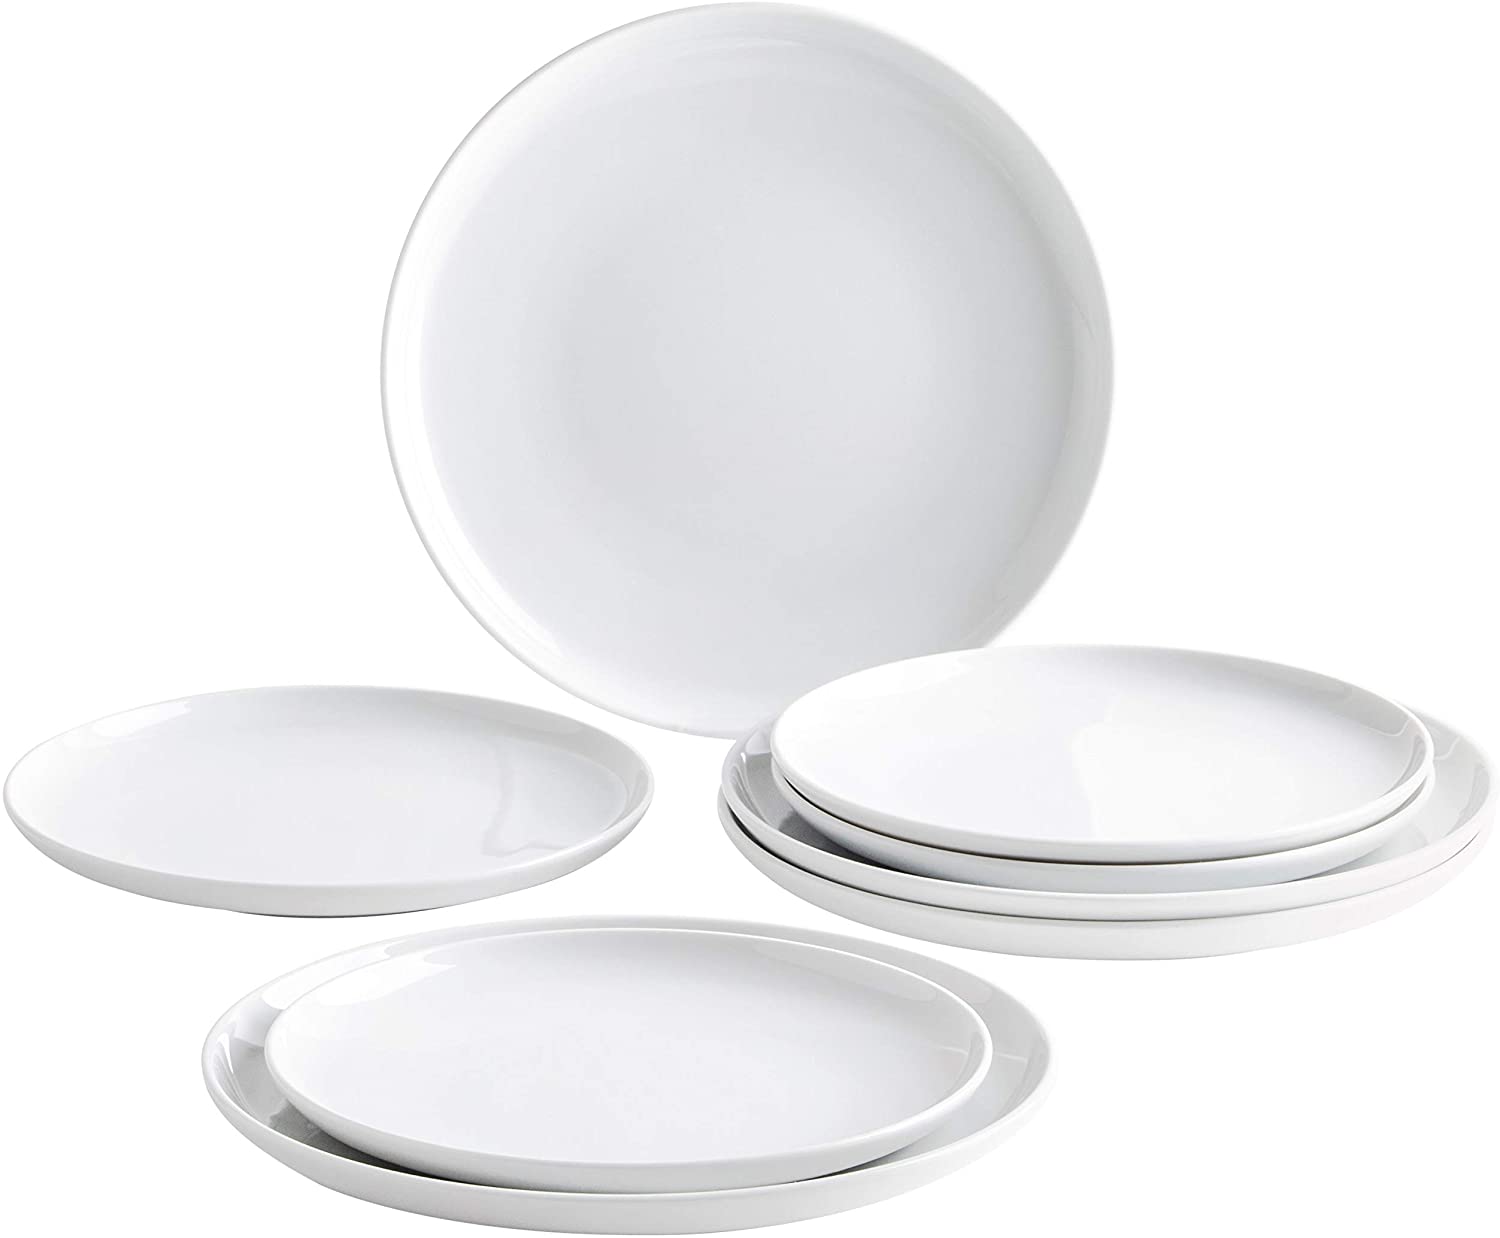 KAHLA BBQ Grill Plate Set 8-Piece White